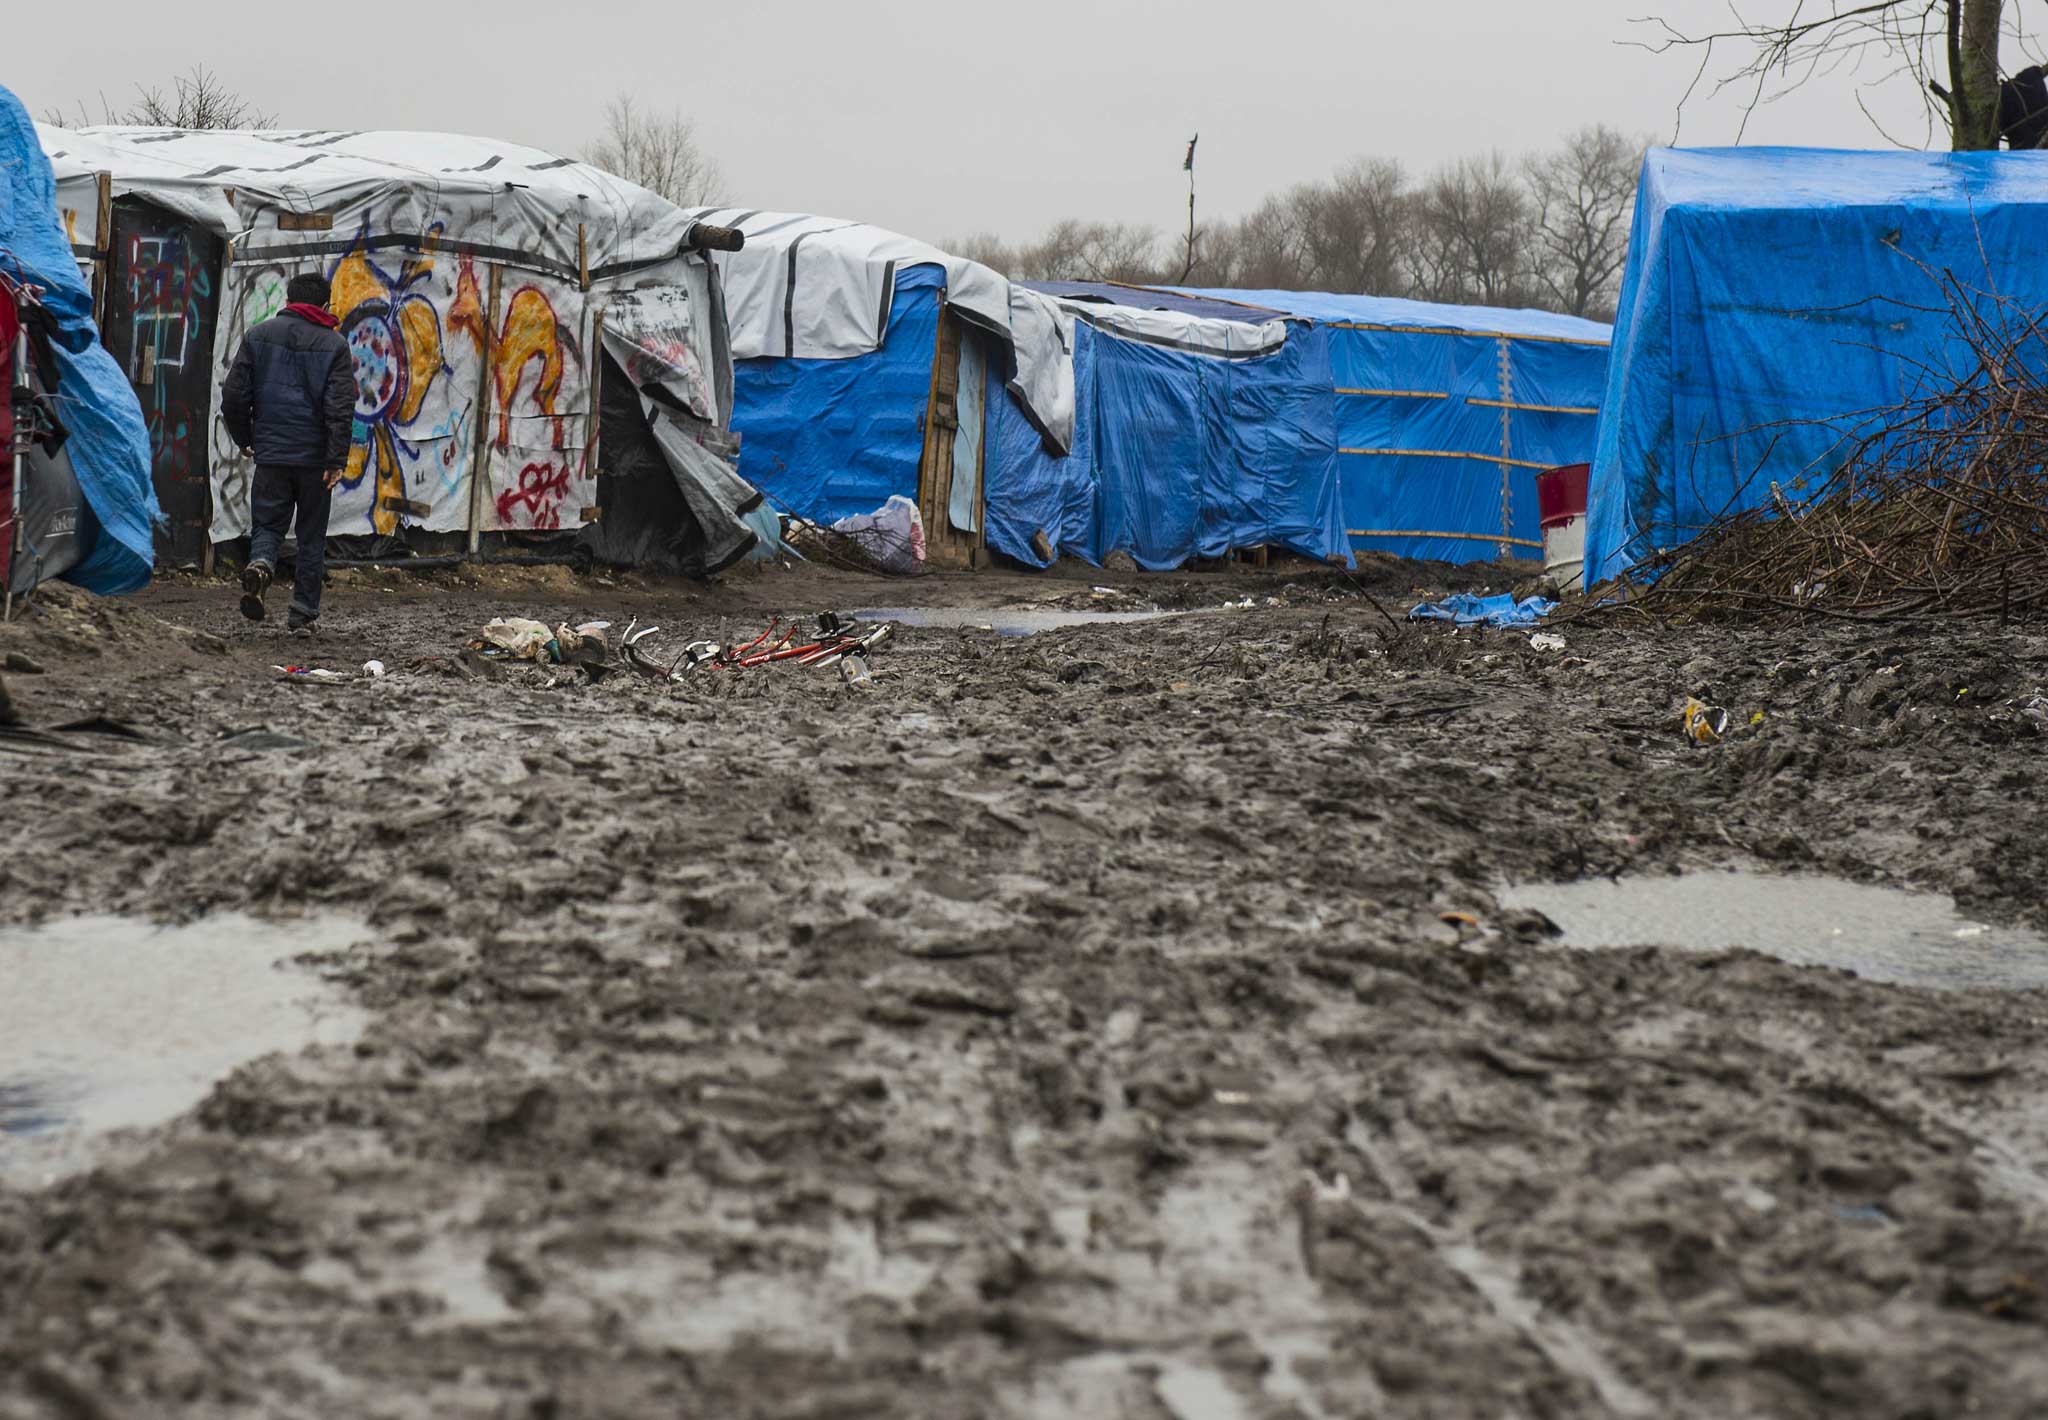 The camps in northern France and makeshift homes for thousands of transient refugees trying to reach Britain